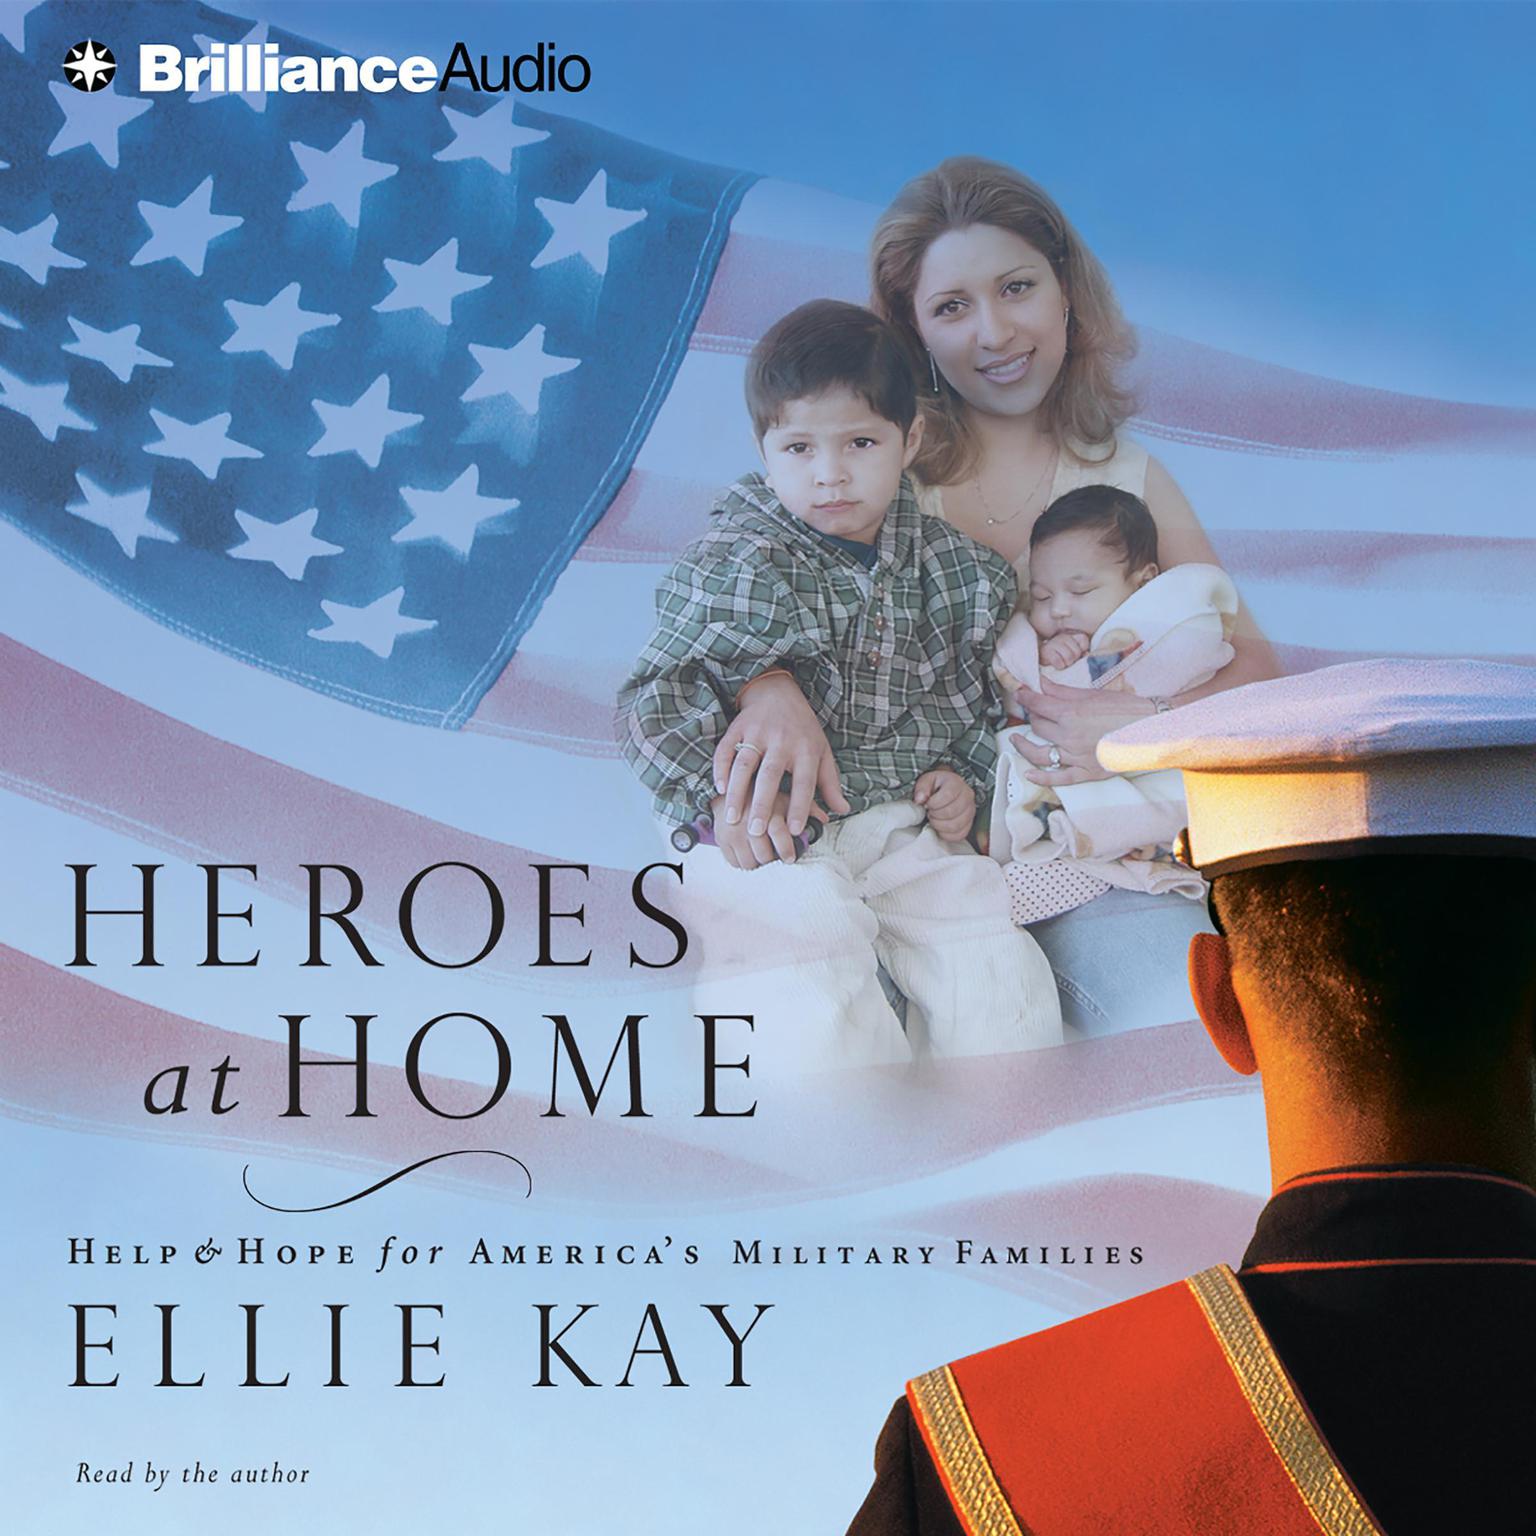 Heroes at Home (Abridged): Help and Hope for Americas Military Families Audiobook, by Ellie Kay